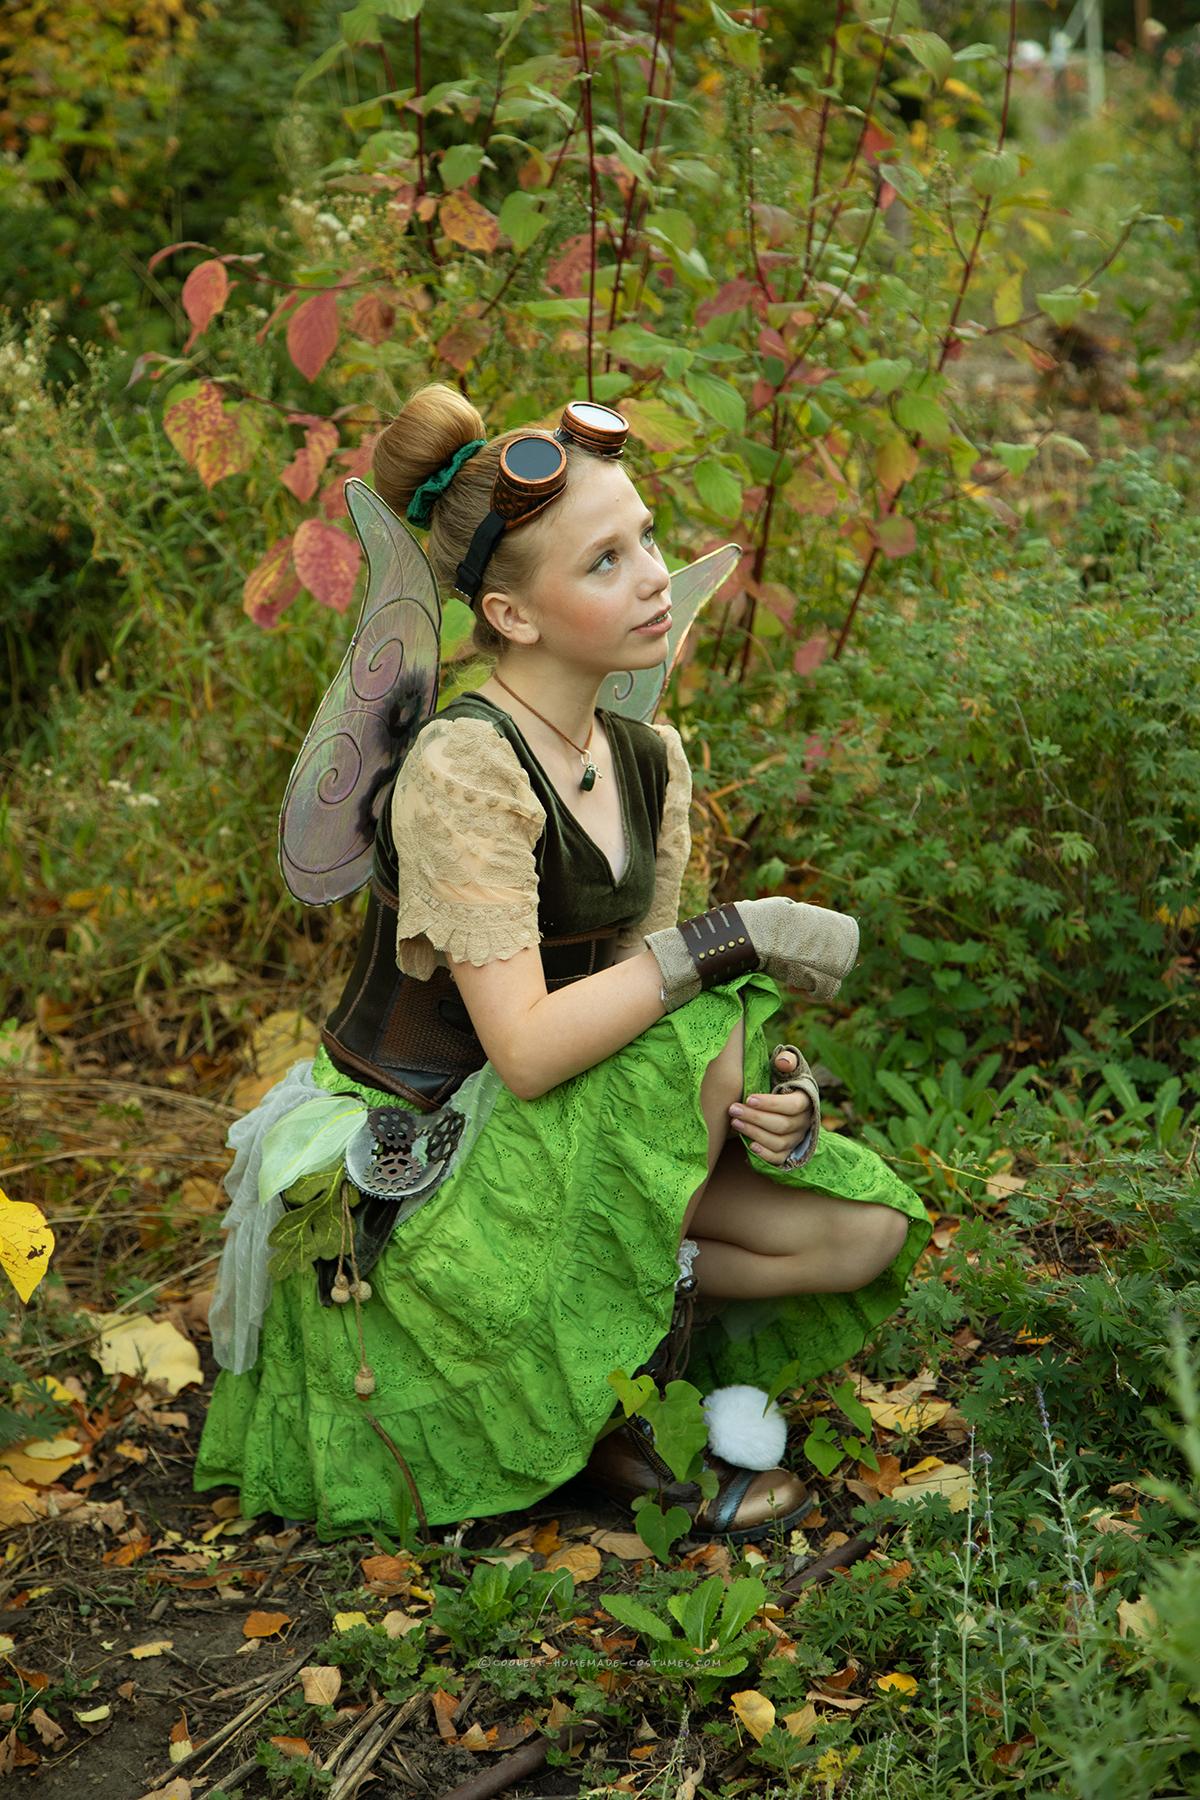 Coolest DIY Steampunk Tinkerbell Costume